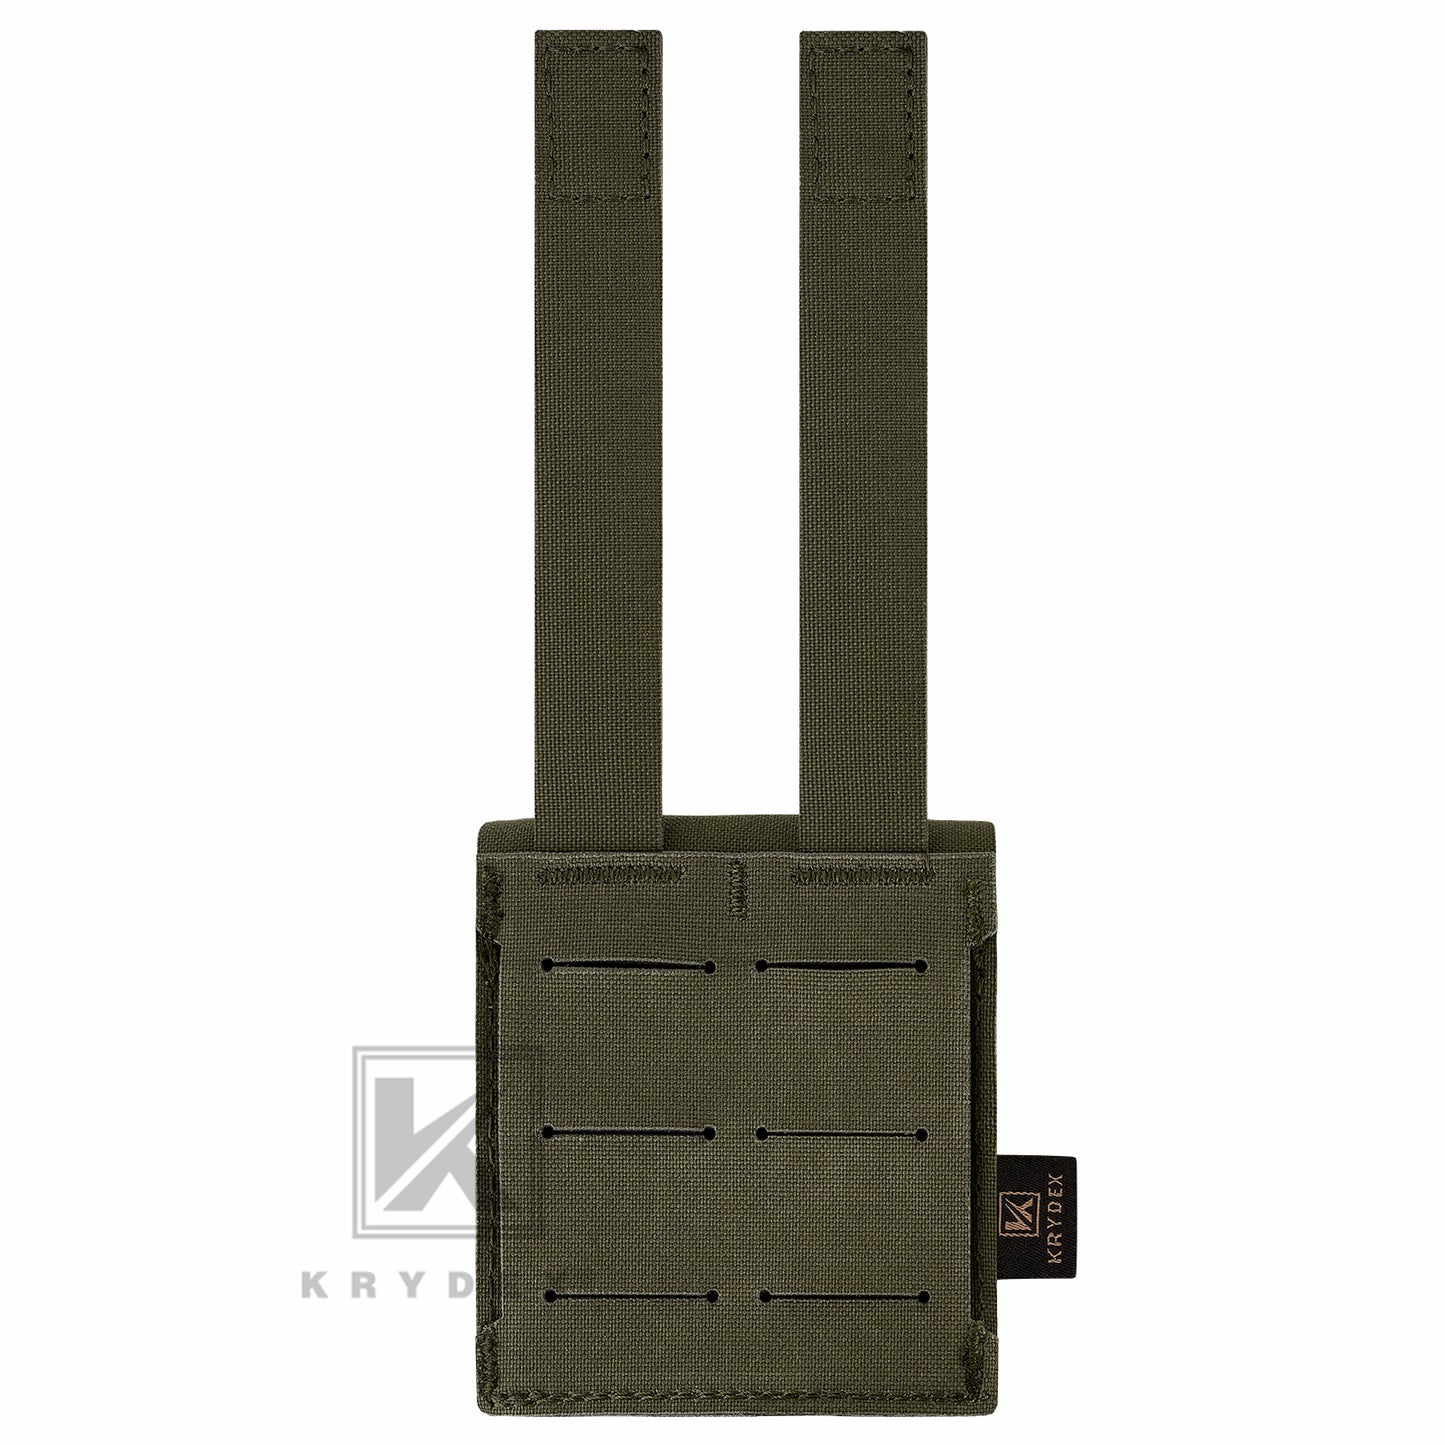 KRYDEX Tactical Frag Grenade Pouch MOLLE PALS & Belt System Small Handy EDC Glove Pouch